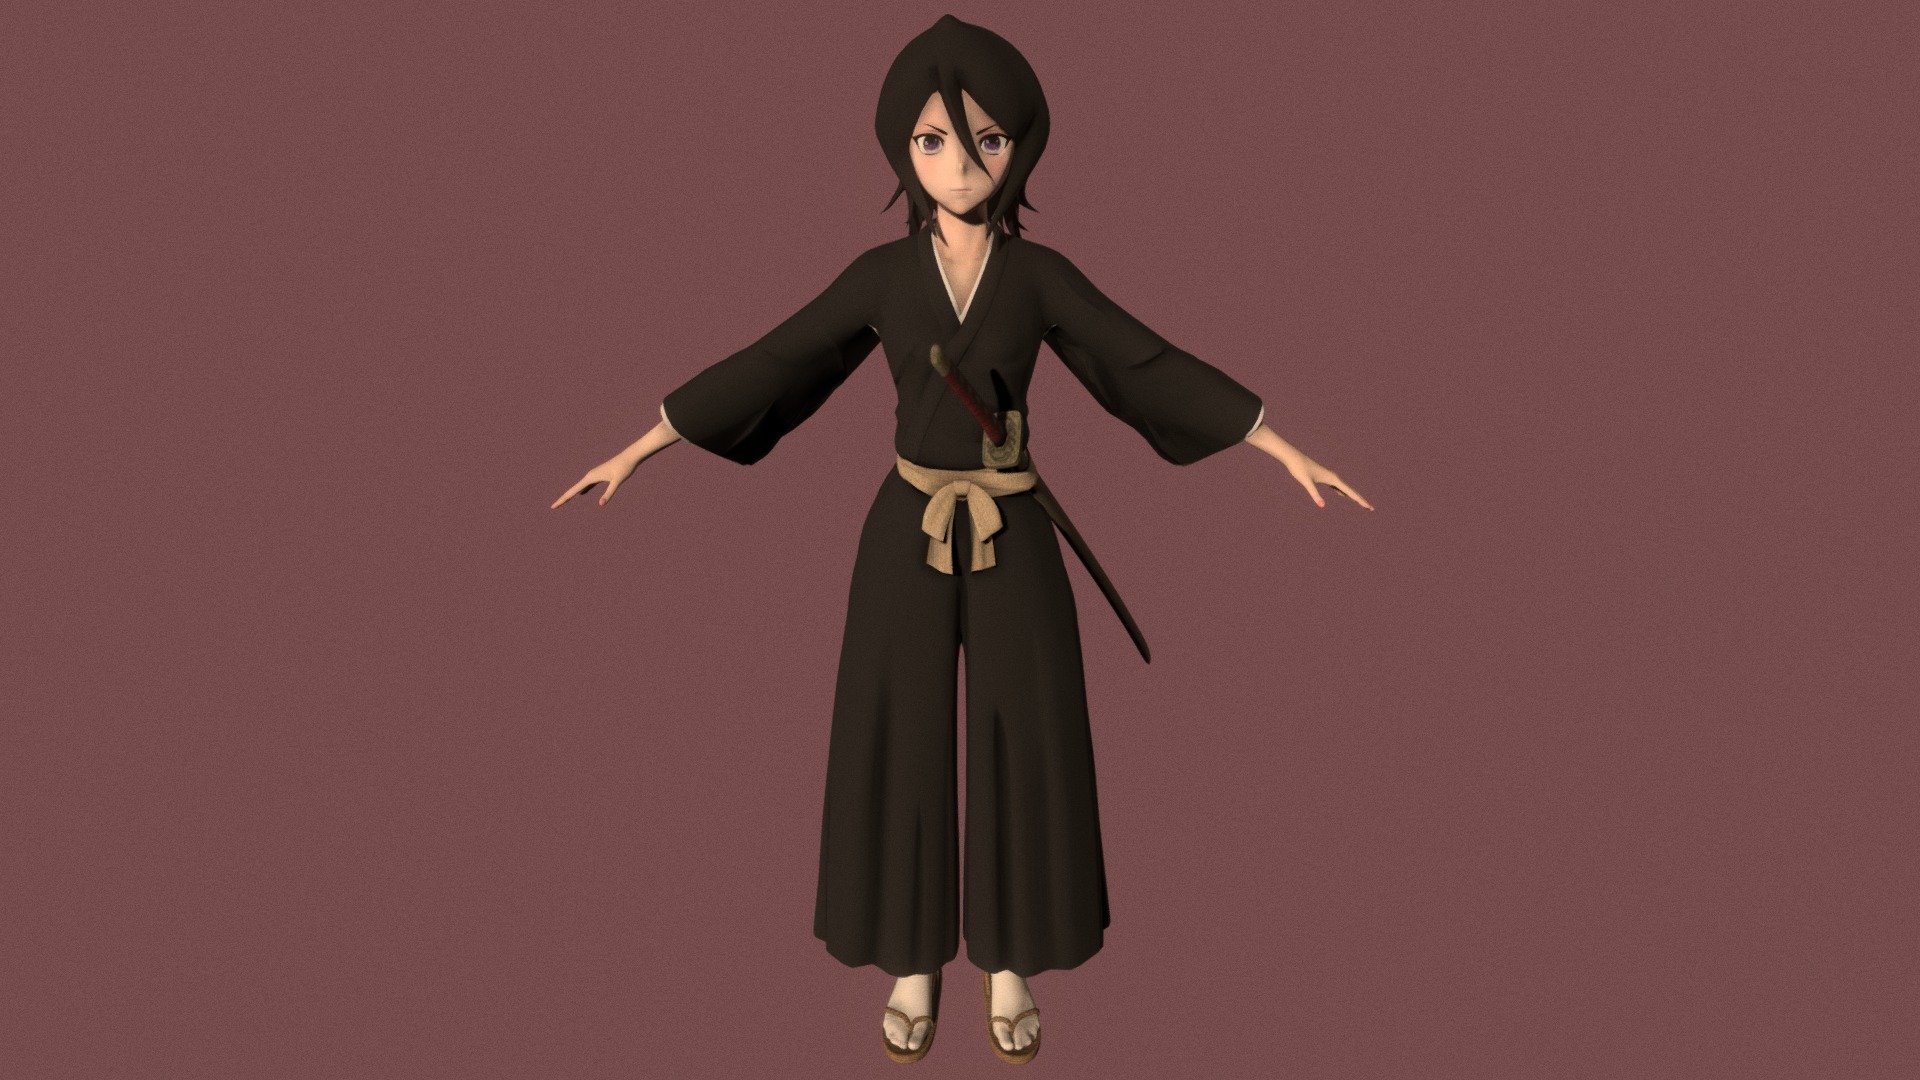 T-pose rigged model of anime girl Rukia Kuchiki (Bleach).

Body and clothings are rigged and skinned by 3ds Max CAT system.

Eye direction and facial animation controlled by Morpher modifier / Shape Keys / Blendshape.

This product include .FBX (ver. 7200) and .MAX (ver. 2010) files.

3ds Max version is turbosmoothed to give a high quality render (as you can see here).

Original main body mesh have ~7.000 polys.

This 3D model may need some tweaking to adapt the rig system to games engine and other platforms.

I support convert model to various file formats (the rig data will be lost in this process): 3DS; AI; ASE; DAE; DWF; DWG; DXF; FLT; HTR; IGS; M3G; MQO; OBJ; SAT; STL; W3D; WRL; X.

You can buy all of my models in one pack to save cost: https://sketchfab.com/3d-models/all-of-my-anime-girls-c5a56156994e4193b9e8fa21a3b8360b

And I can make commission models.

If you have any questions, please leave a comment or contact me via my email 3d.eden.project@gmail.com 3d model